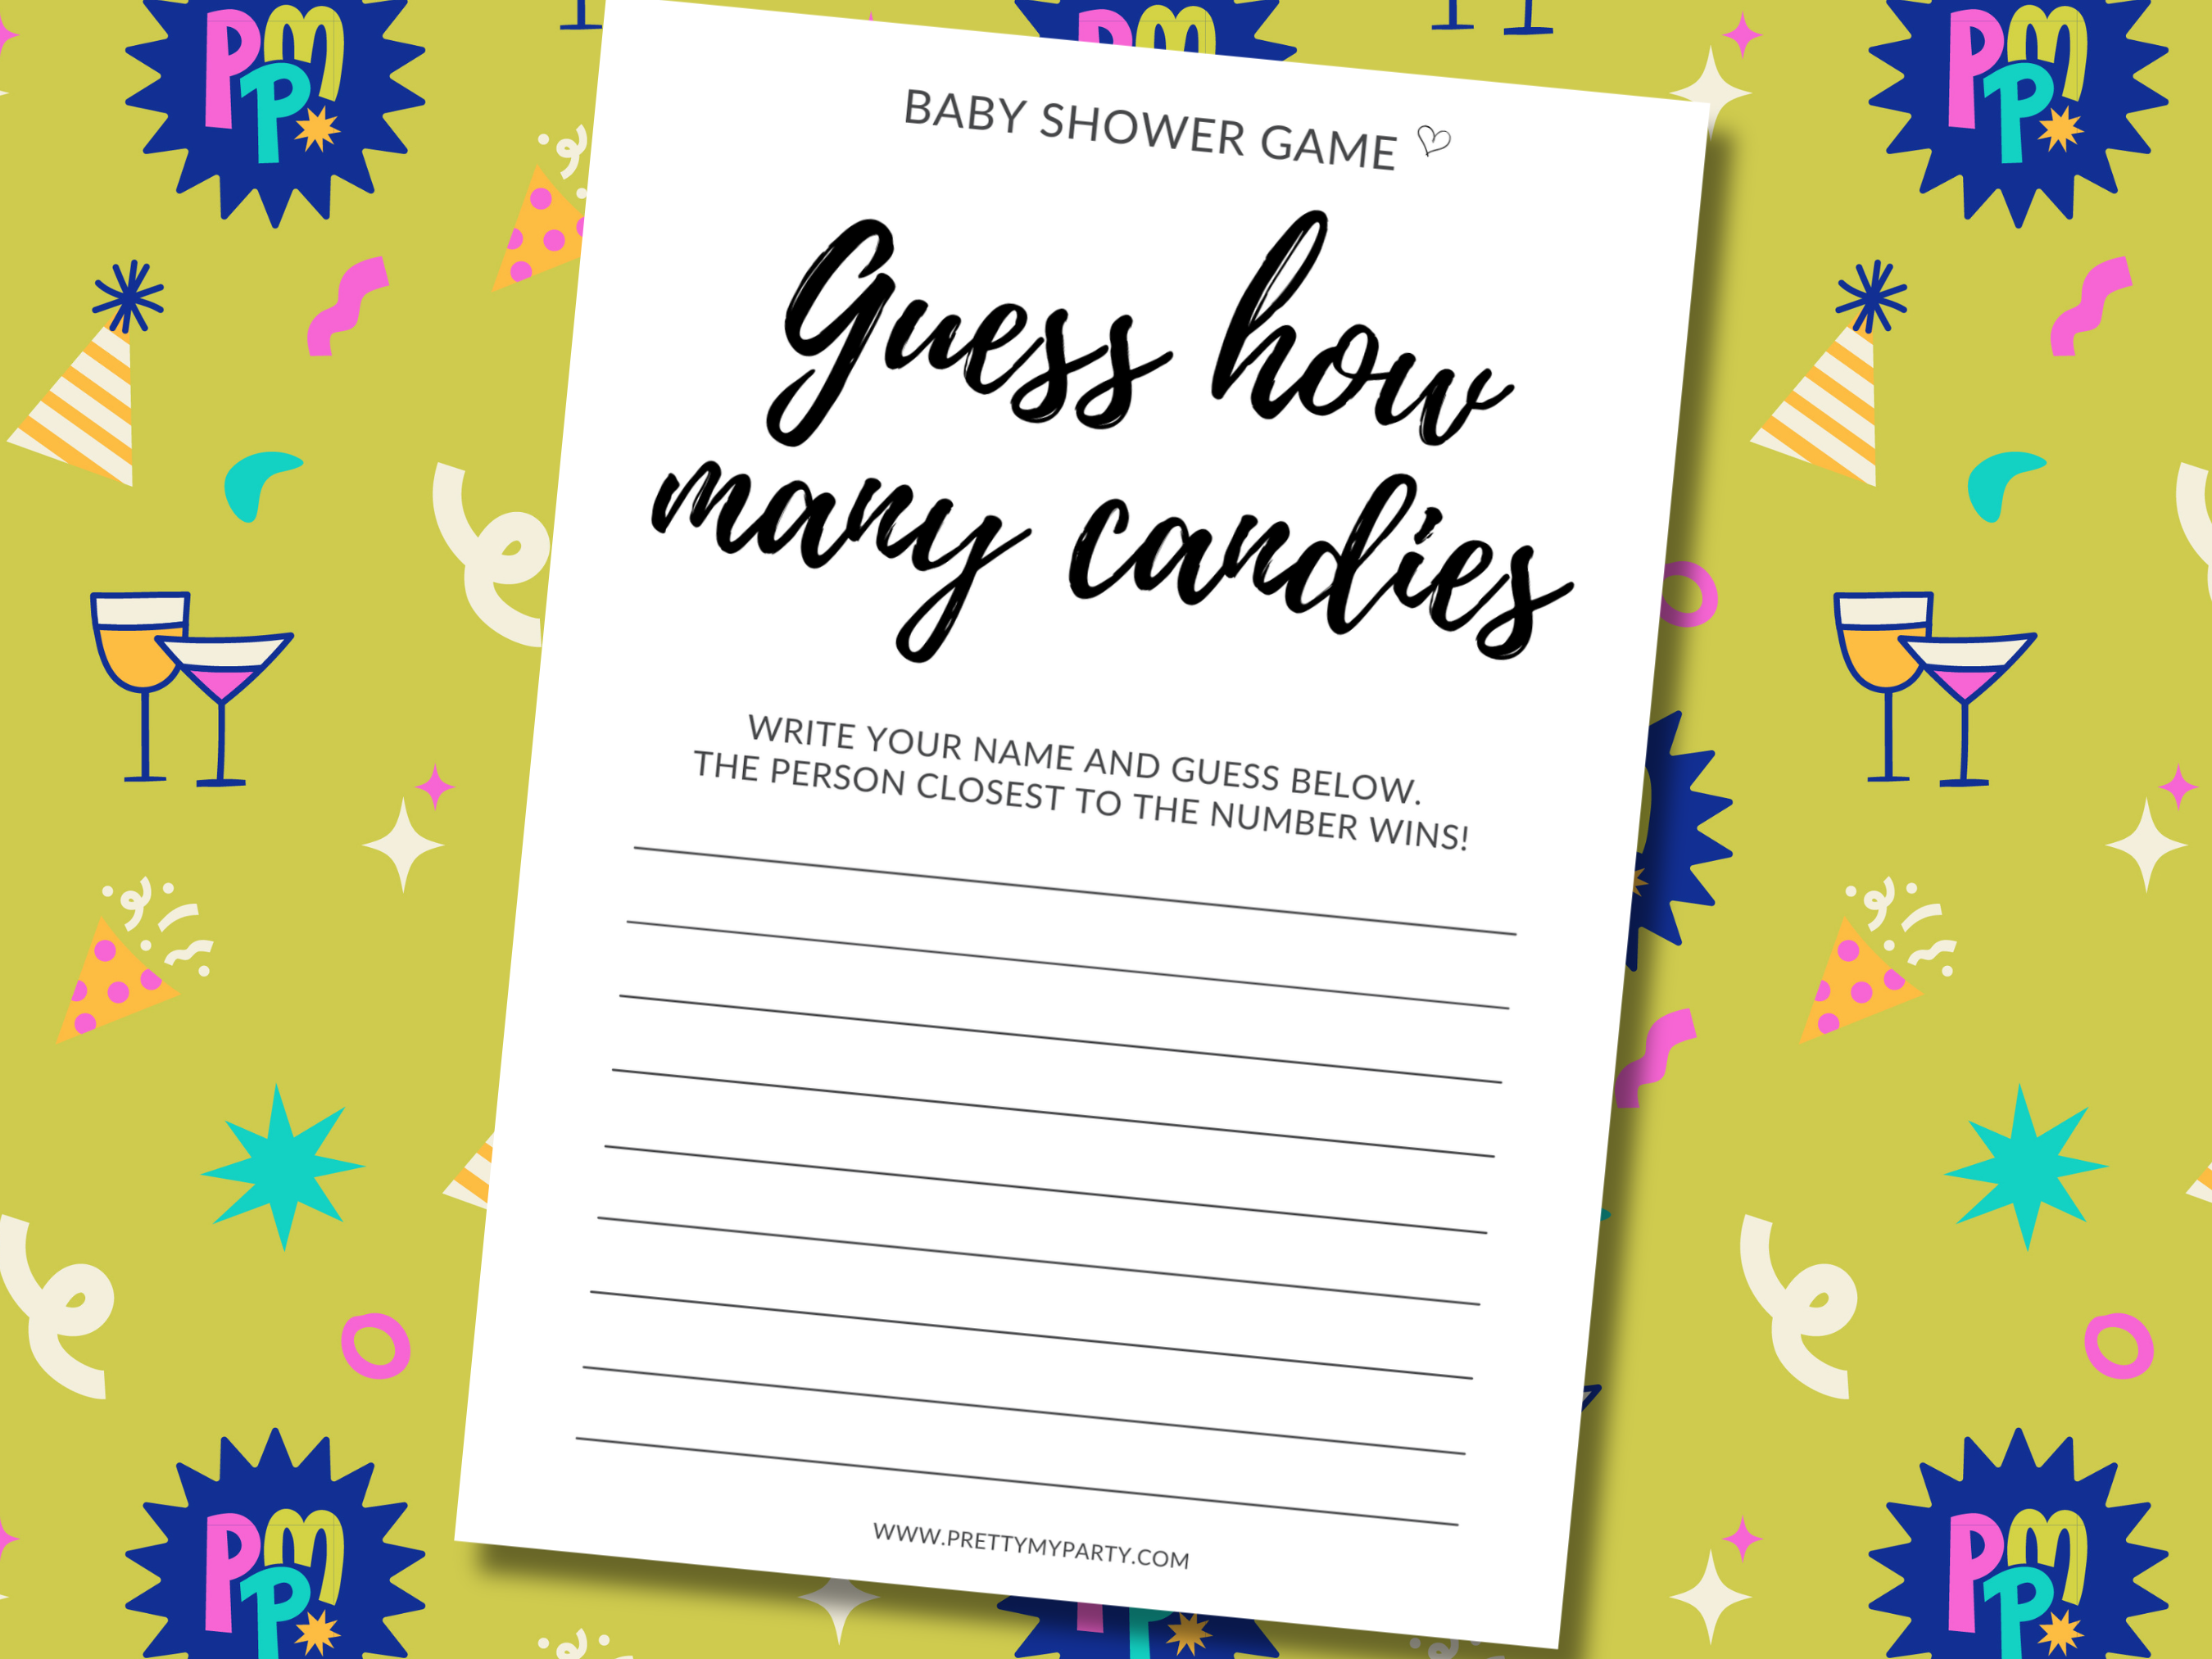 Guess the Candies Free Printable Baby Shower Game on Pretty My Party